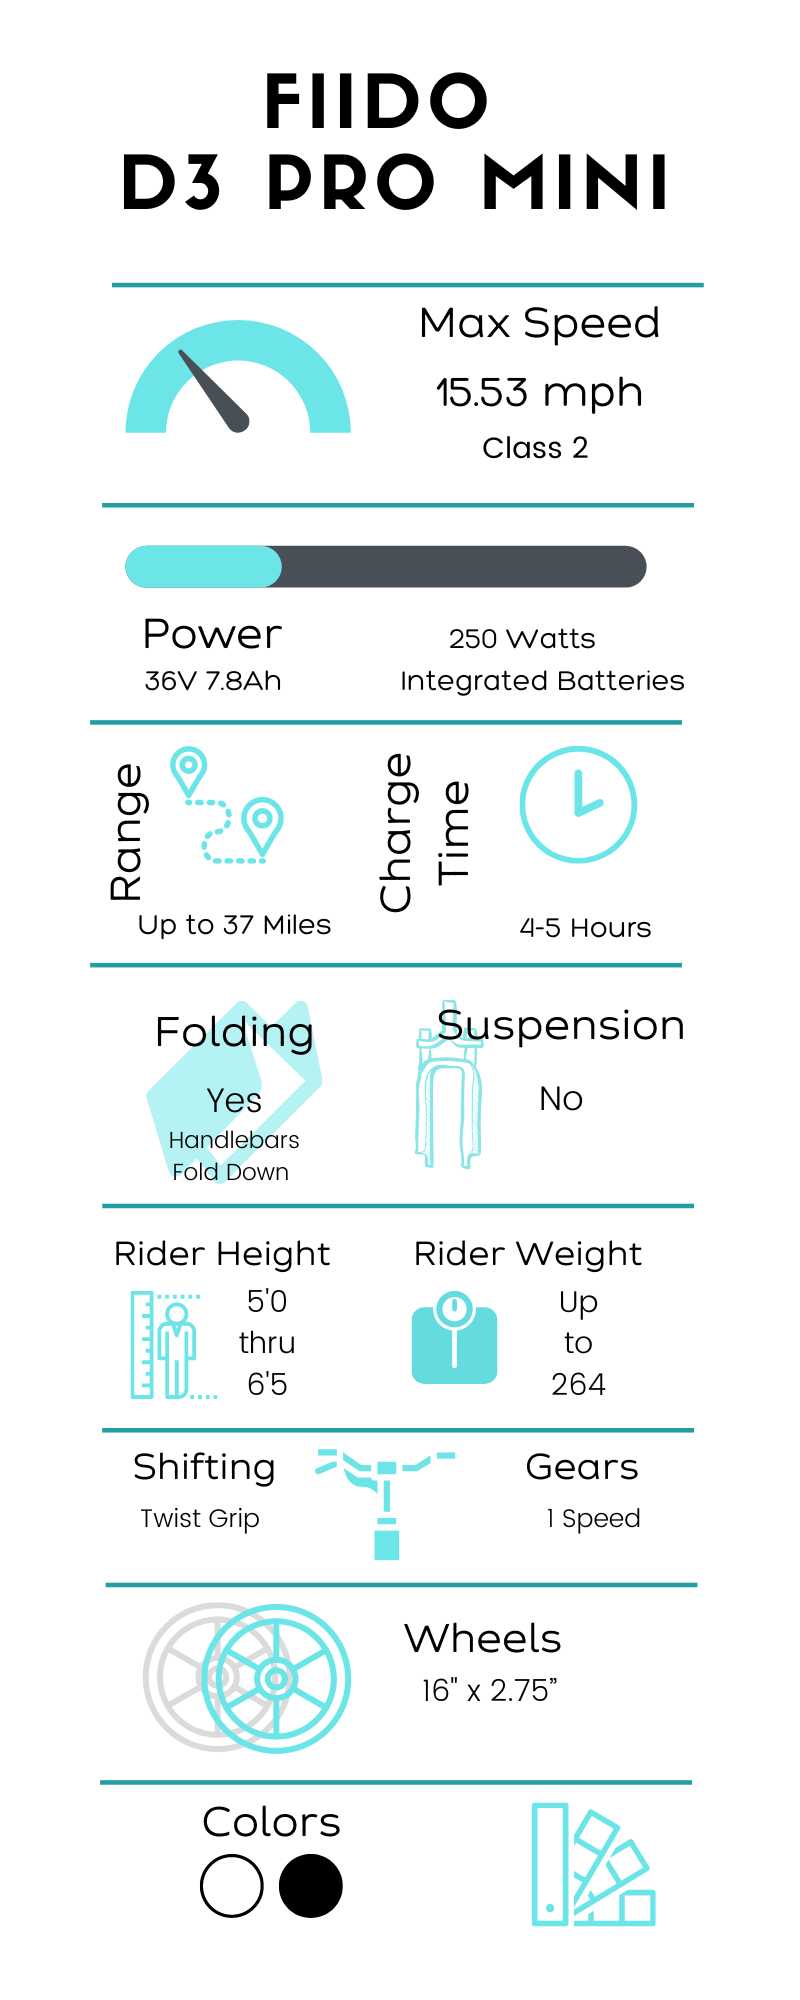 Infographic about the Fiido D3 Pro eBike that is compatible with the Go4-E Connection Kit to create a Blackbird Bikes Sociable Tandem side-by-side quadribike. This 4 wheel bicycle offers a stable ride inclusive for all abilities and adaptive to special needs riders.